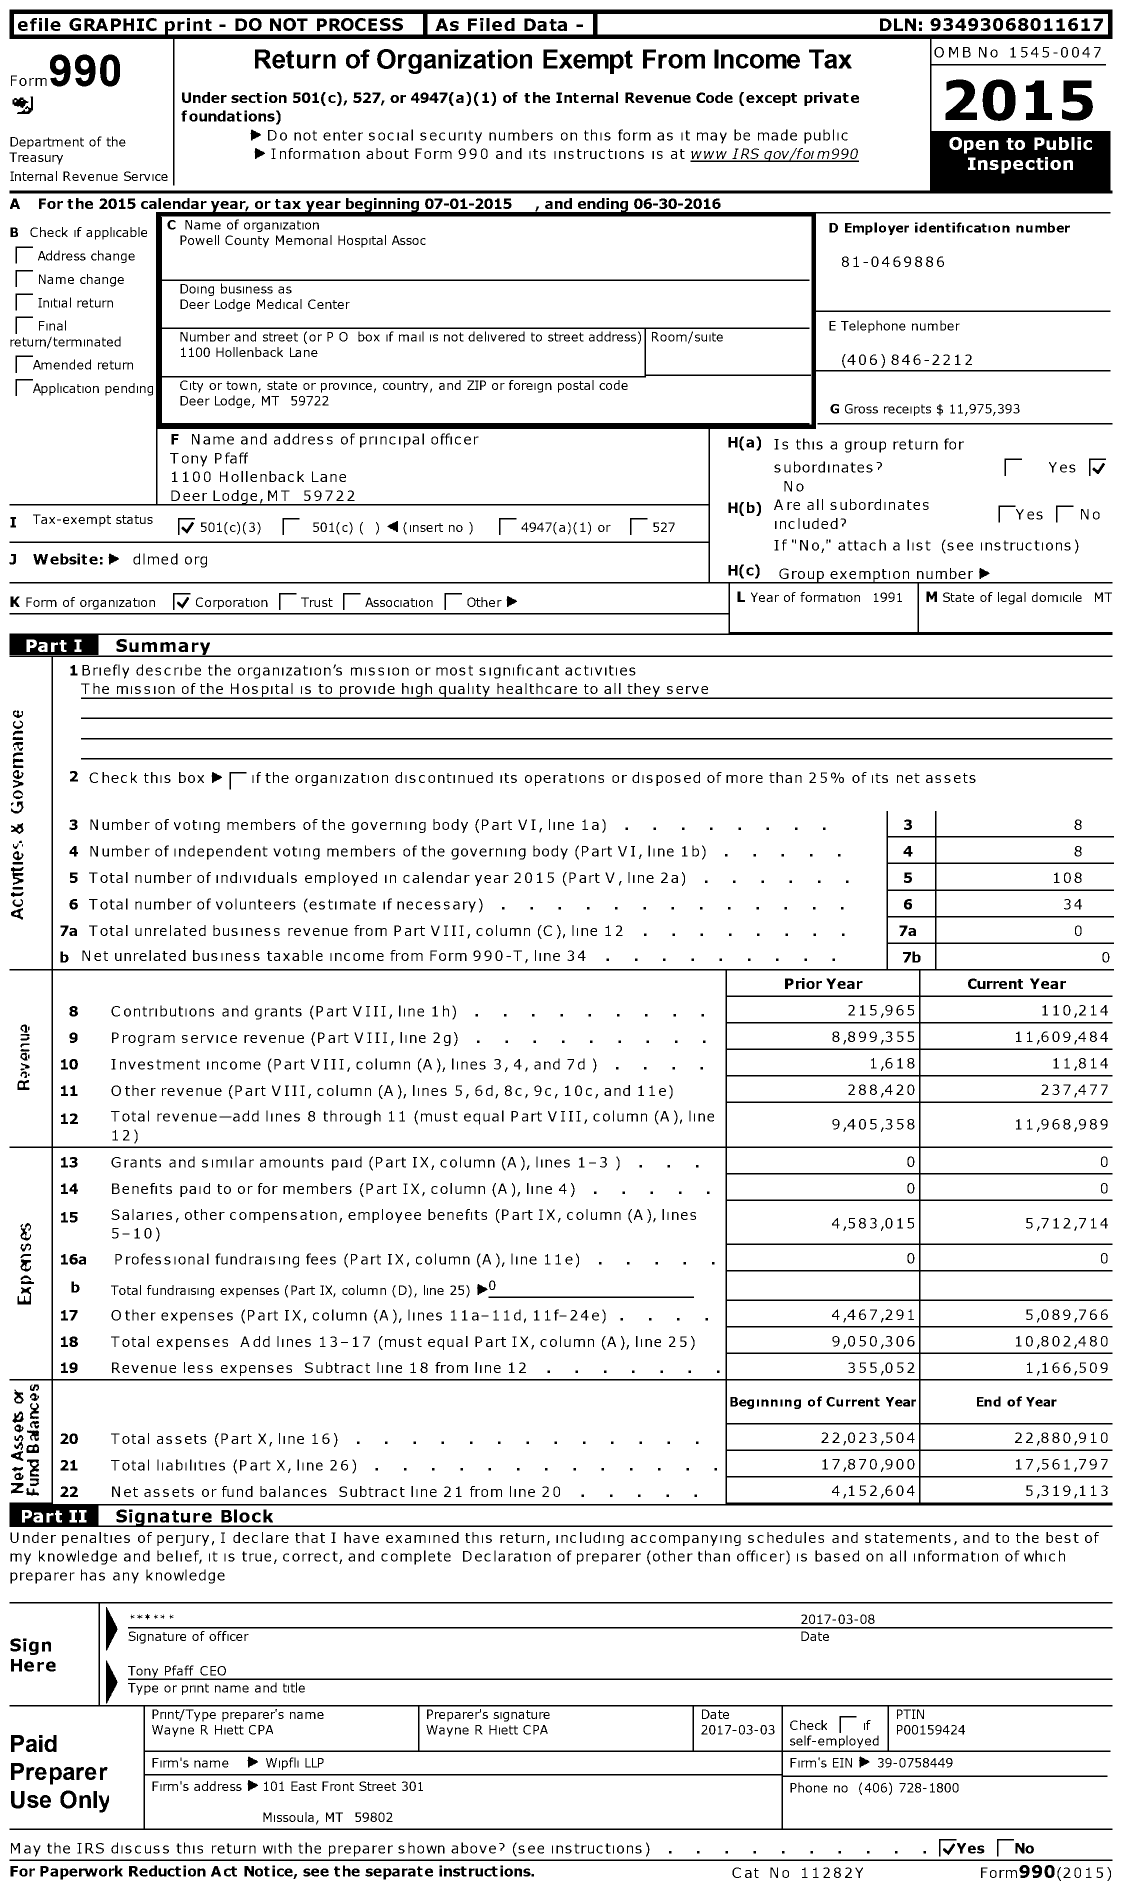 Image of first page of 2015 Form 990 for Deer Lodge Medical Center